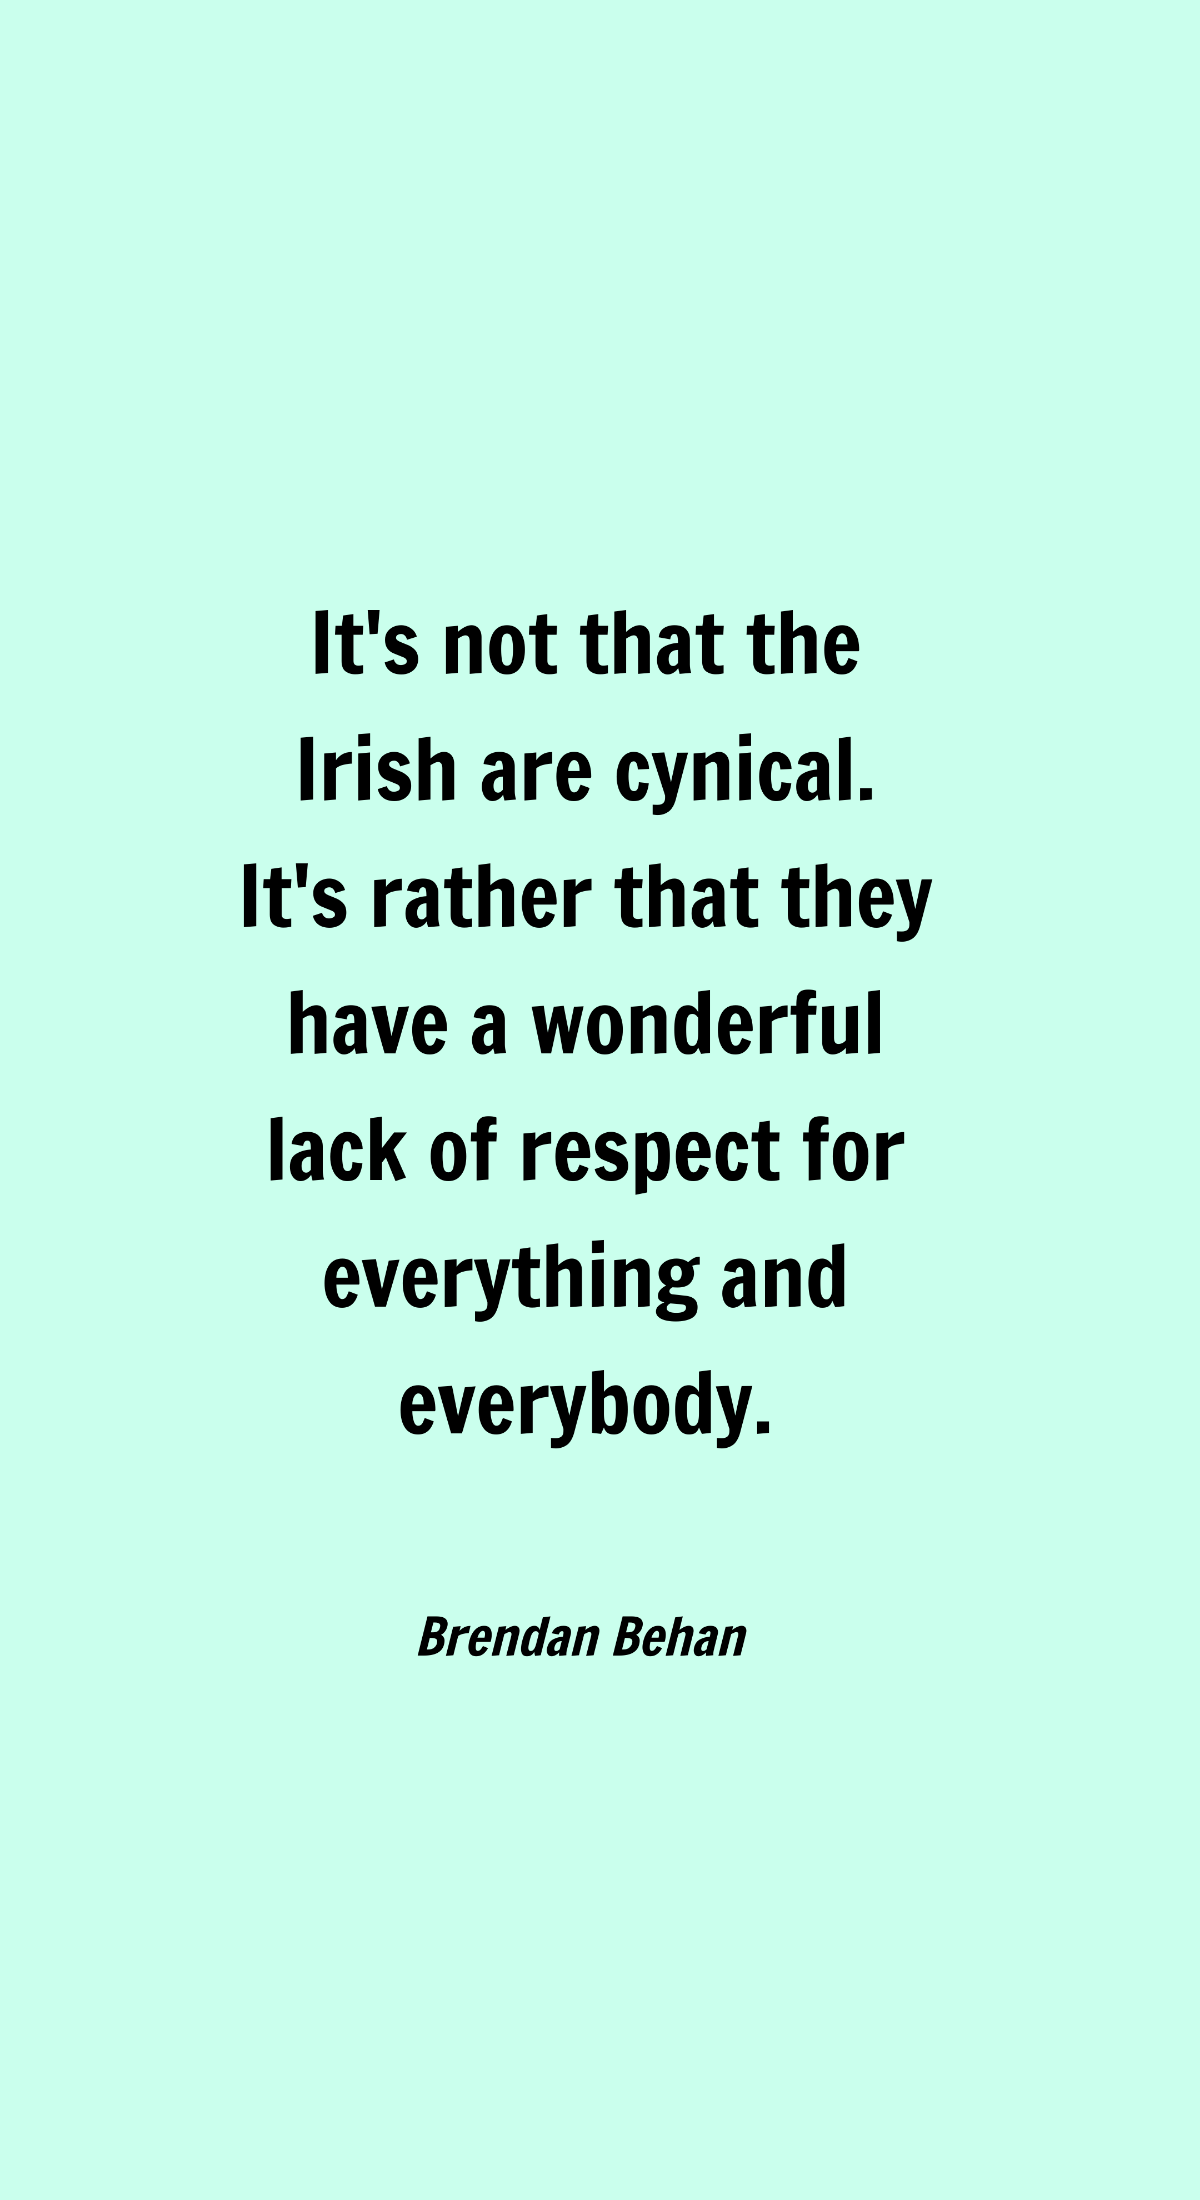 Brendan Behan- It's not that the Irish are cynical. It's rather that they have a wonderful lack of respect for everything and everybody. Template